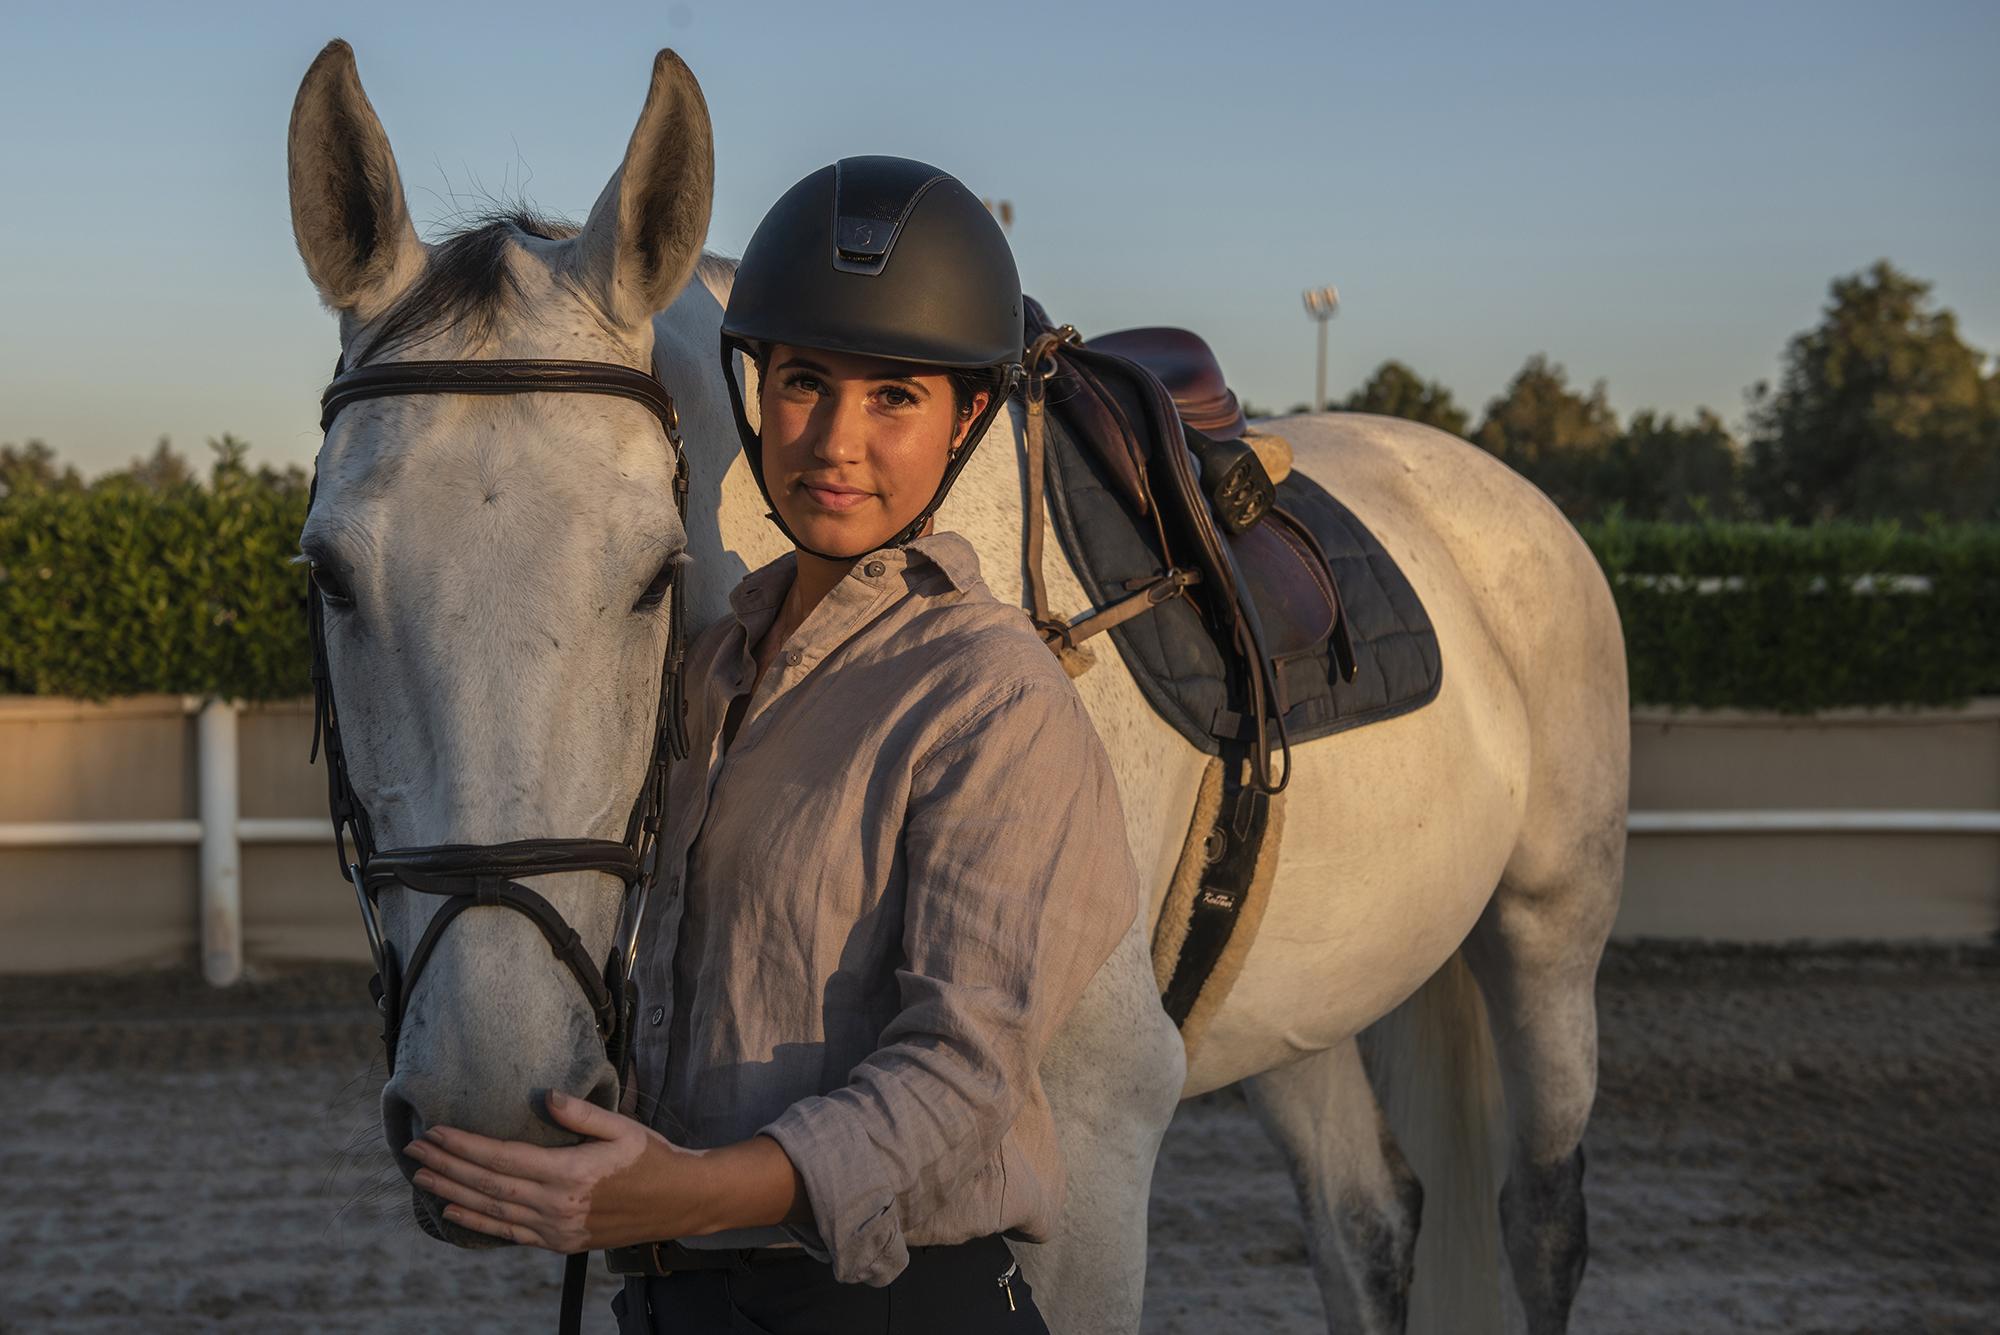 Emirati Woman: Living Dappled - "I feel it's unique" -  Nadine with her horse Molly, she say's "bonding...